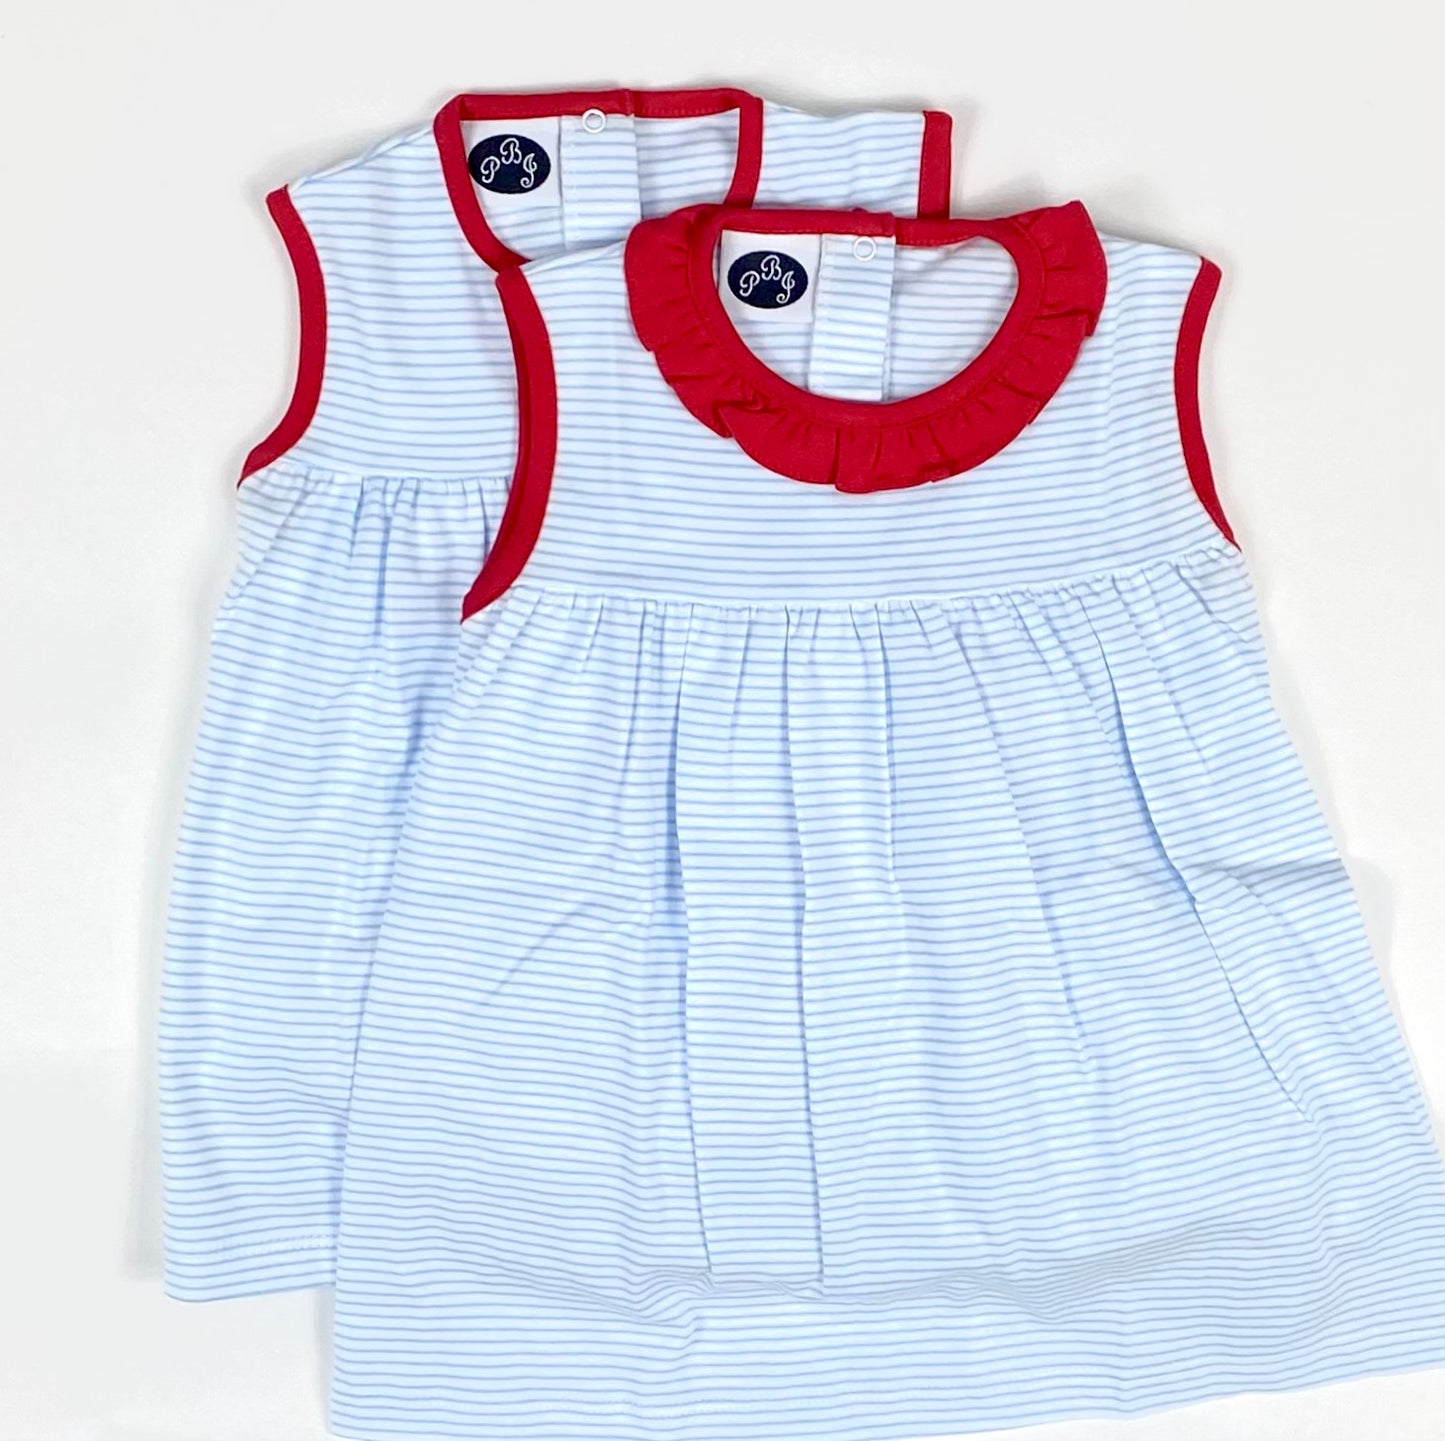 Pima Girl bloomers diaper set - blue stripes/ red